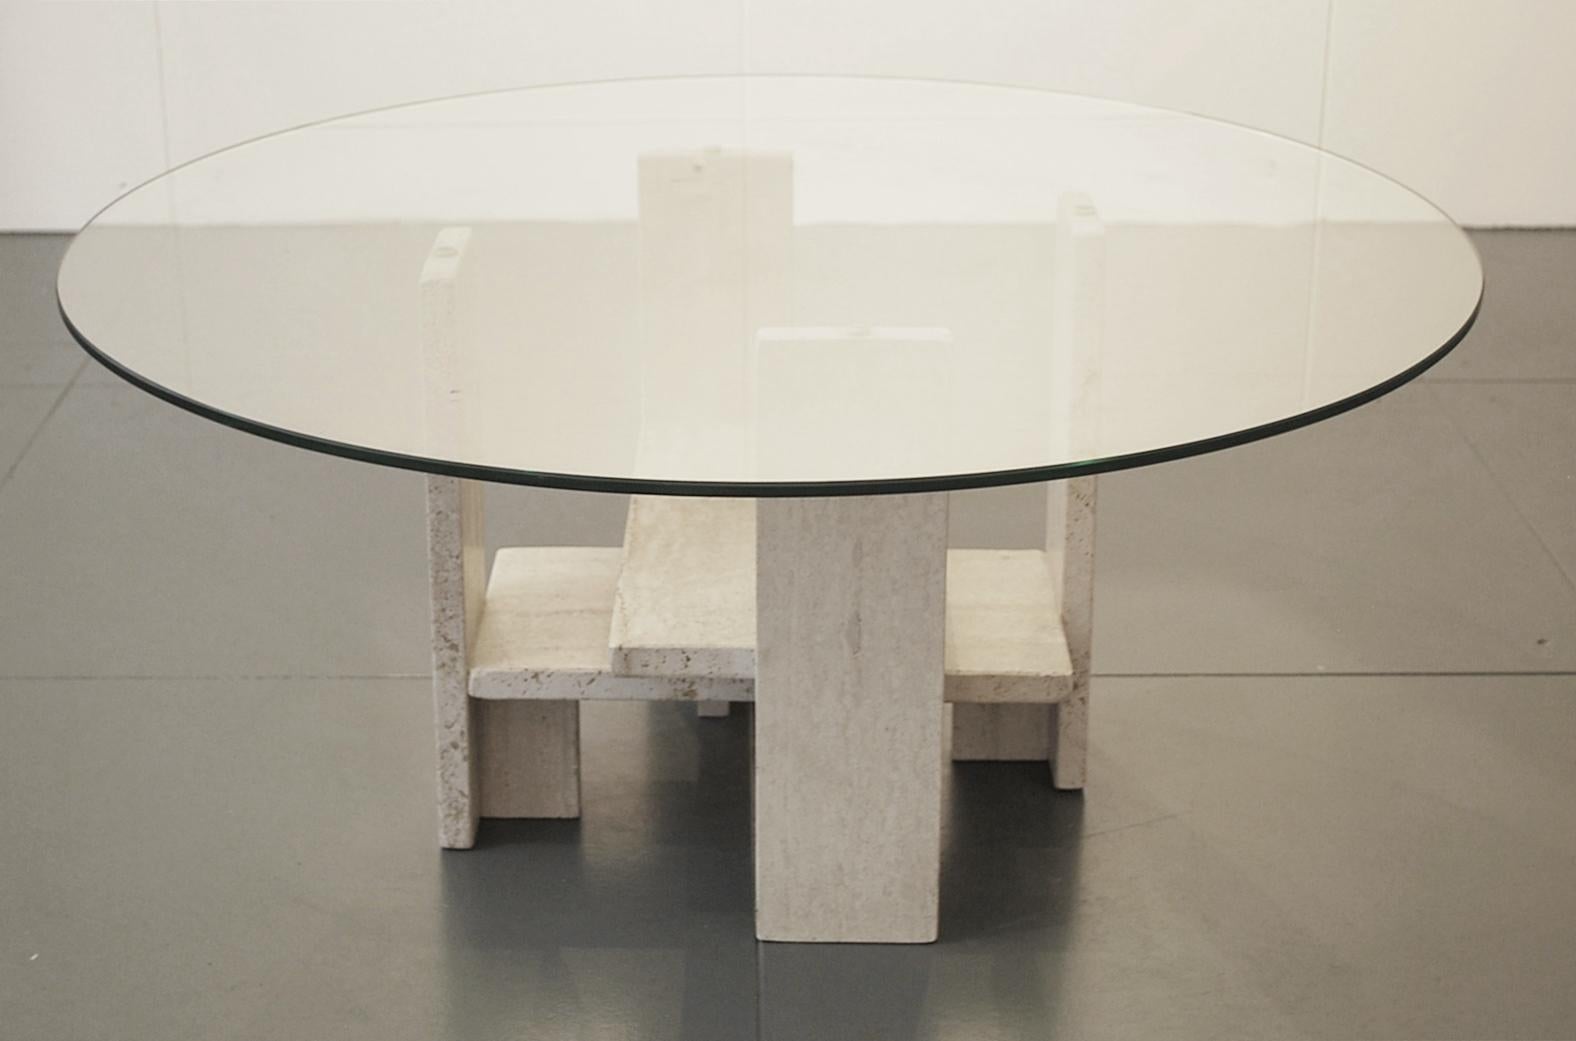 Late 20th Century Mid-Century Brutalist Travertine Coffee Table by Willy Ballez Belgium 1970s